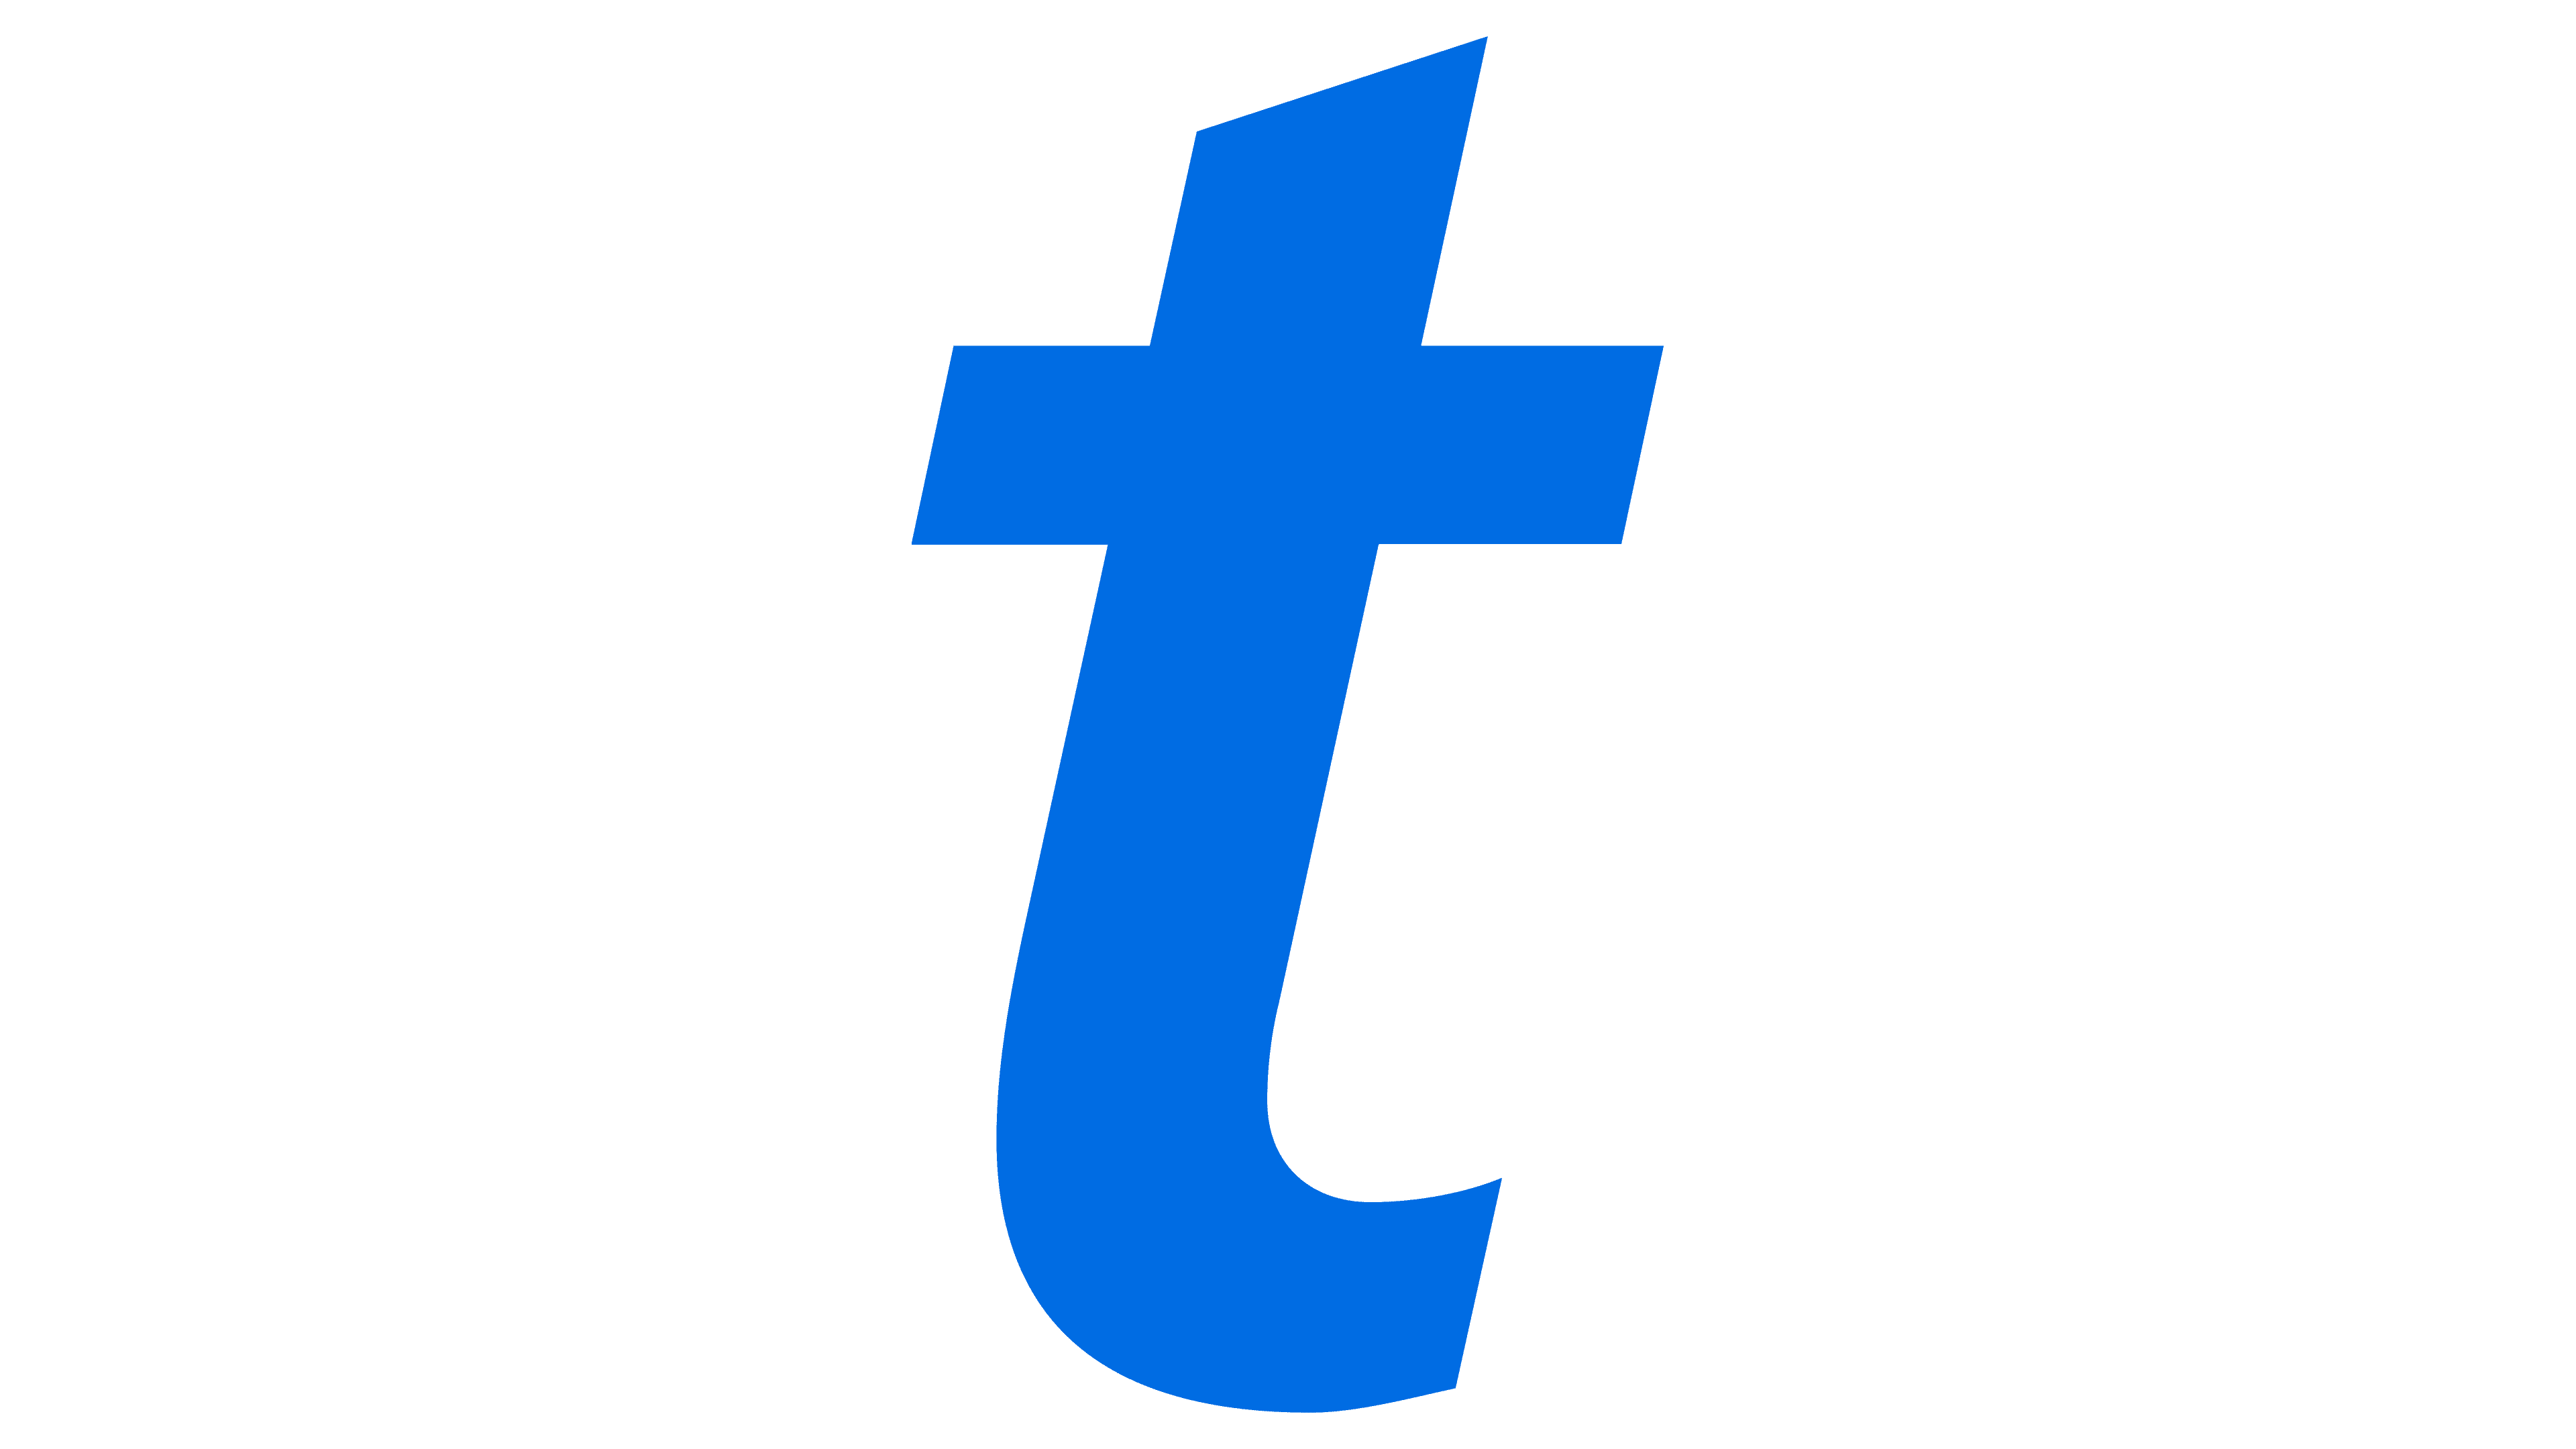 Ticketmaster Logo, symbol, meaning, history, PNG, brand